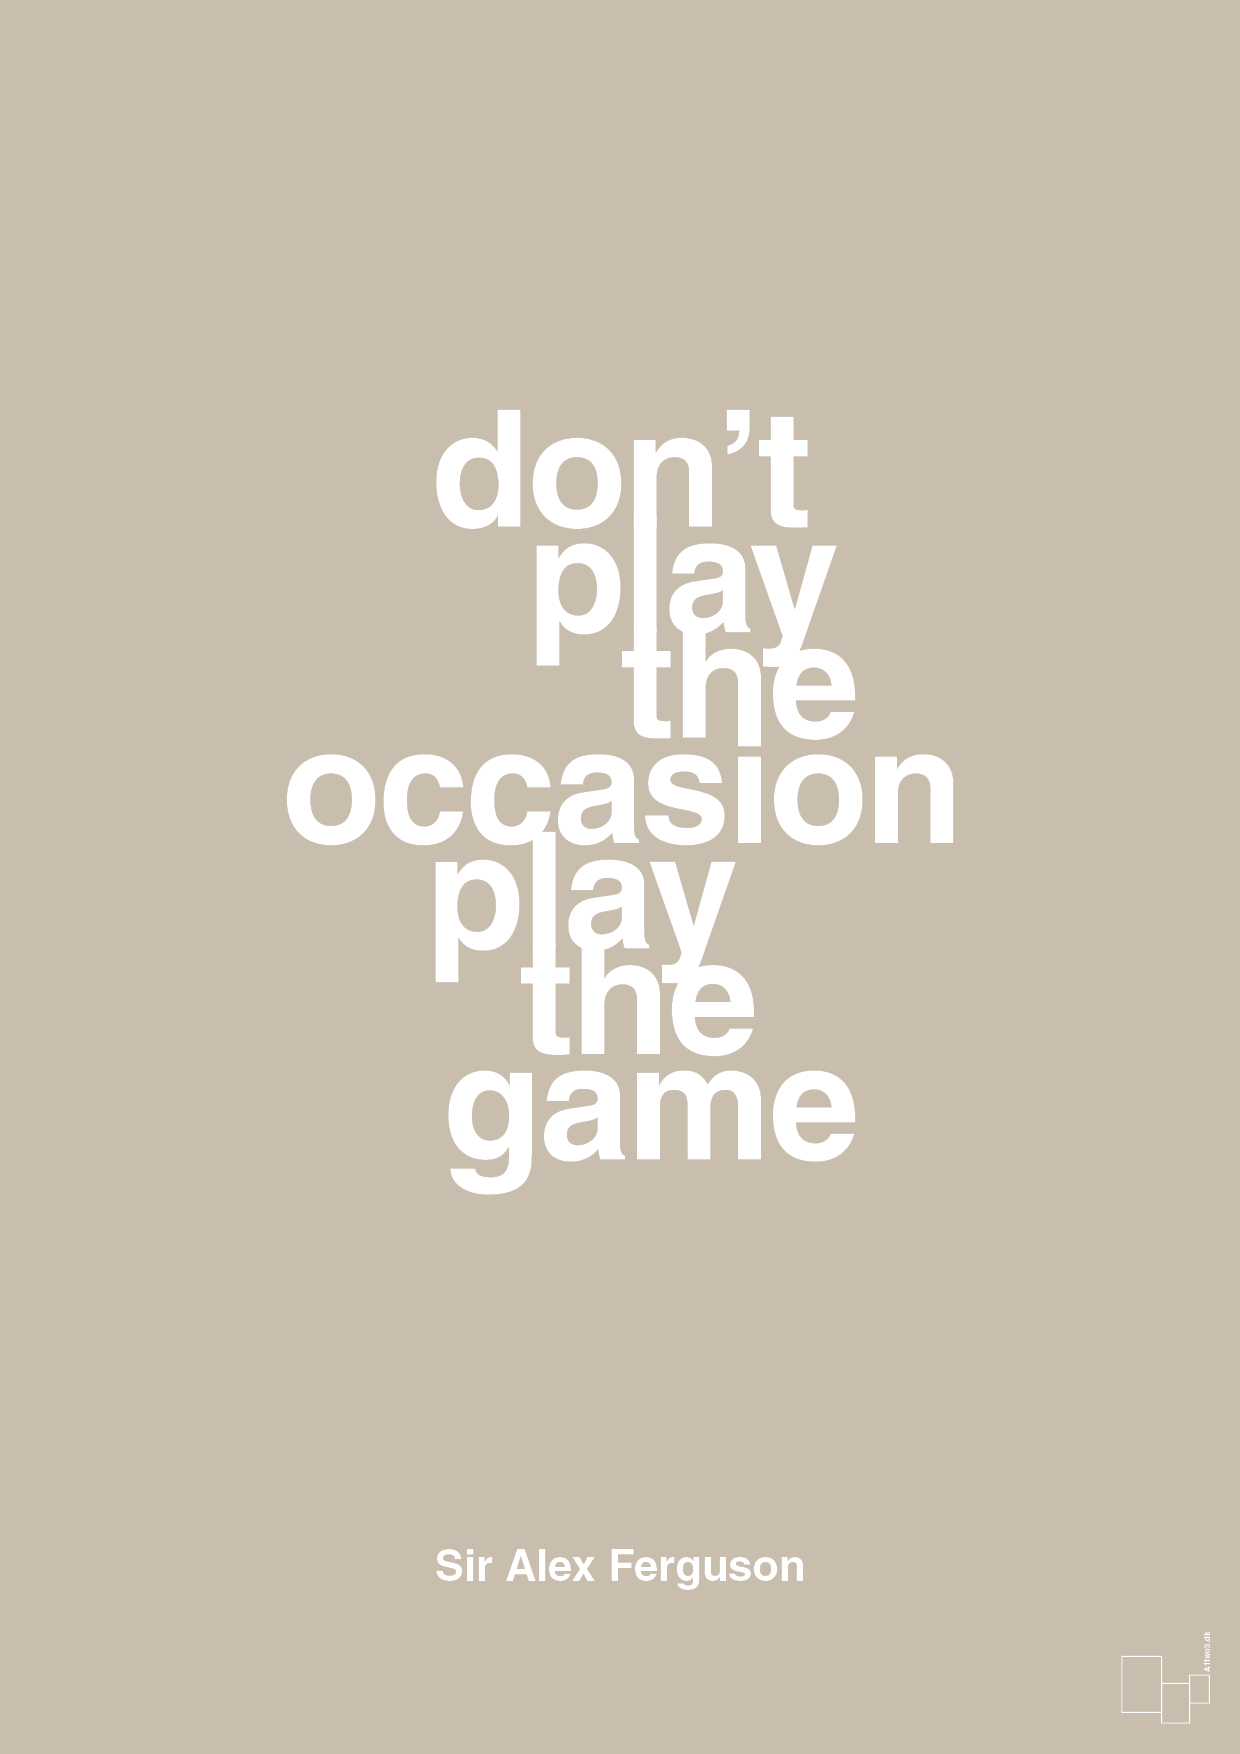 don’t play the occasion play the game - Plakat med Citater i Creamy Mushroom